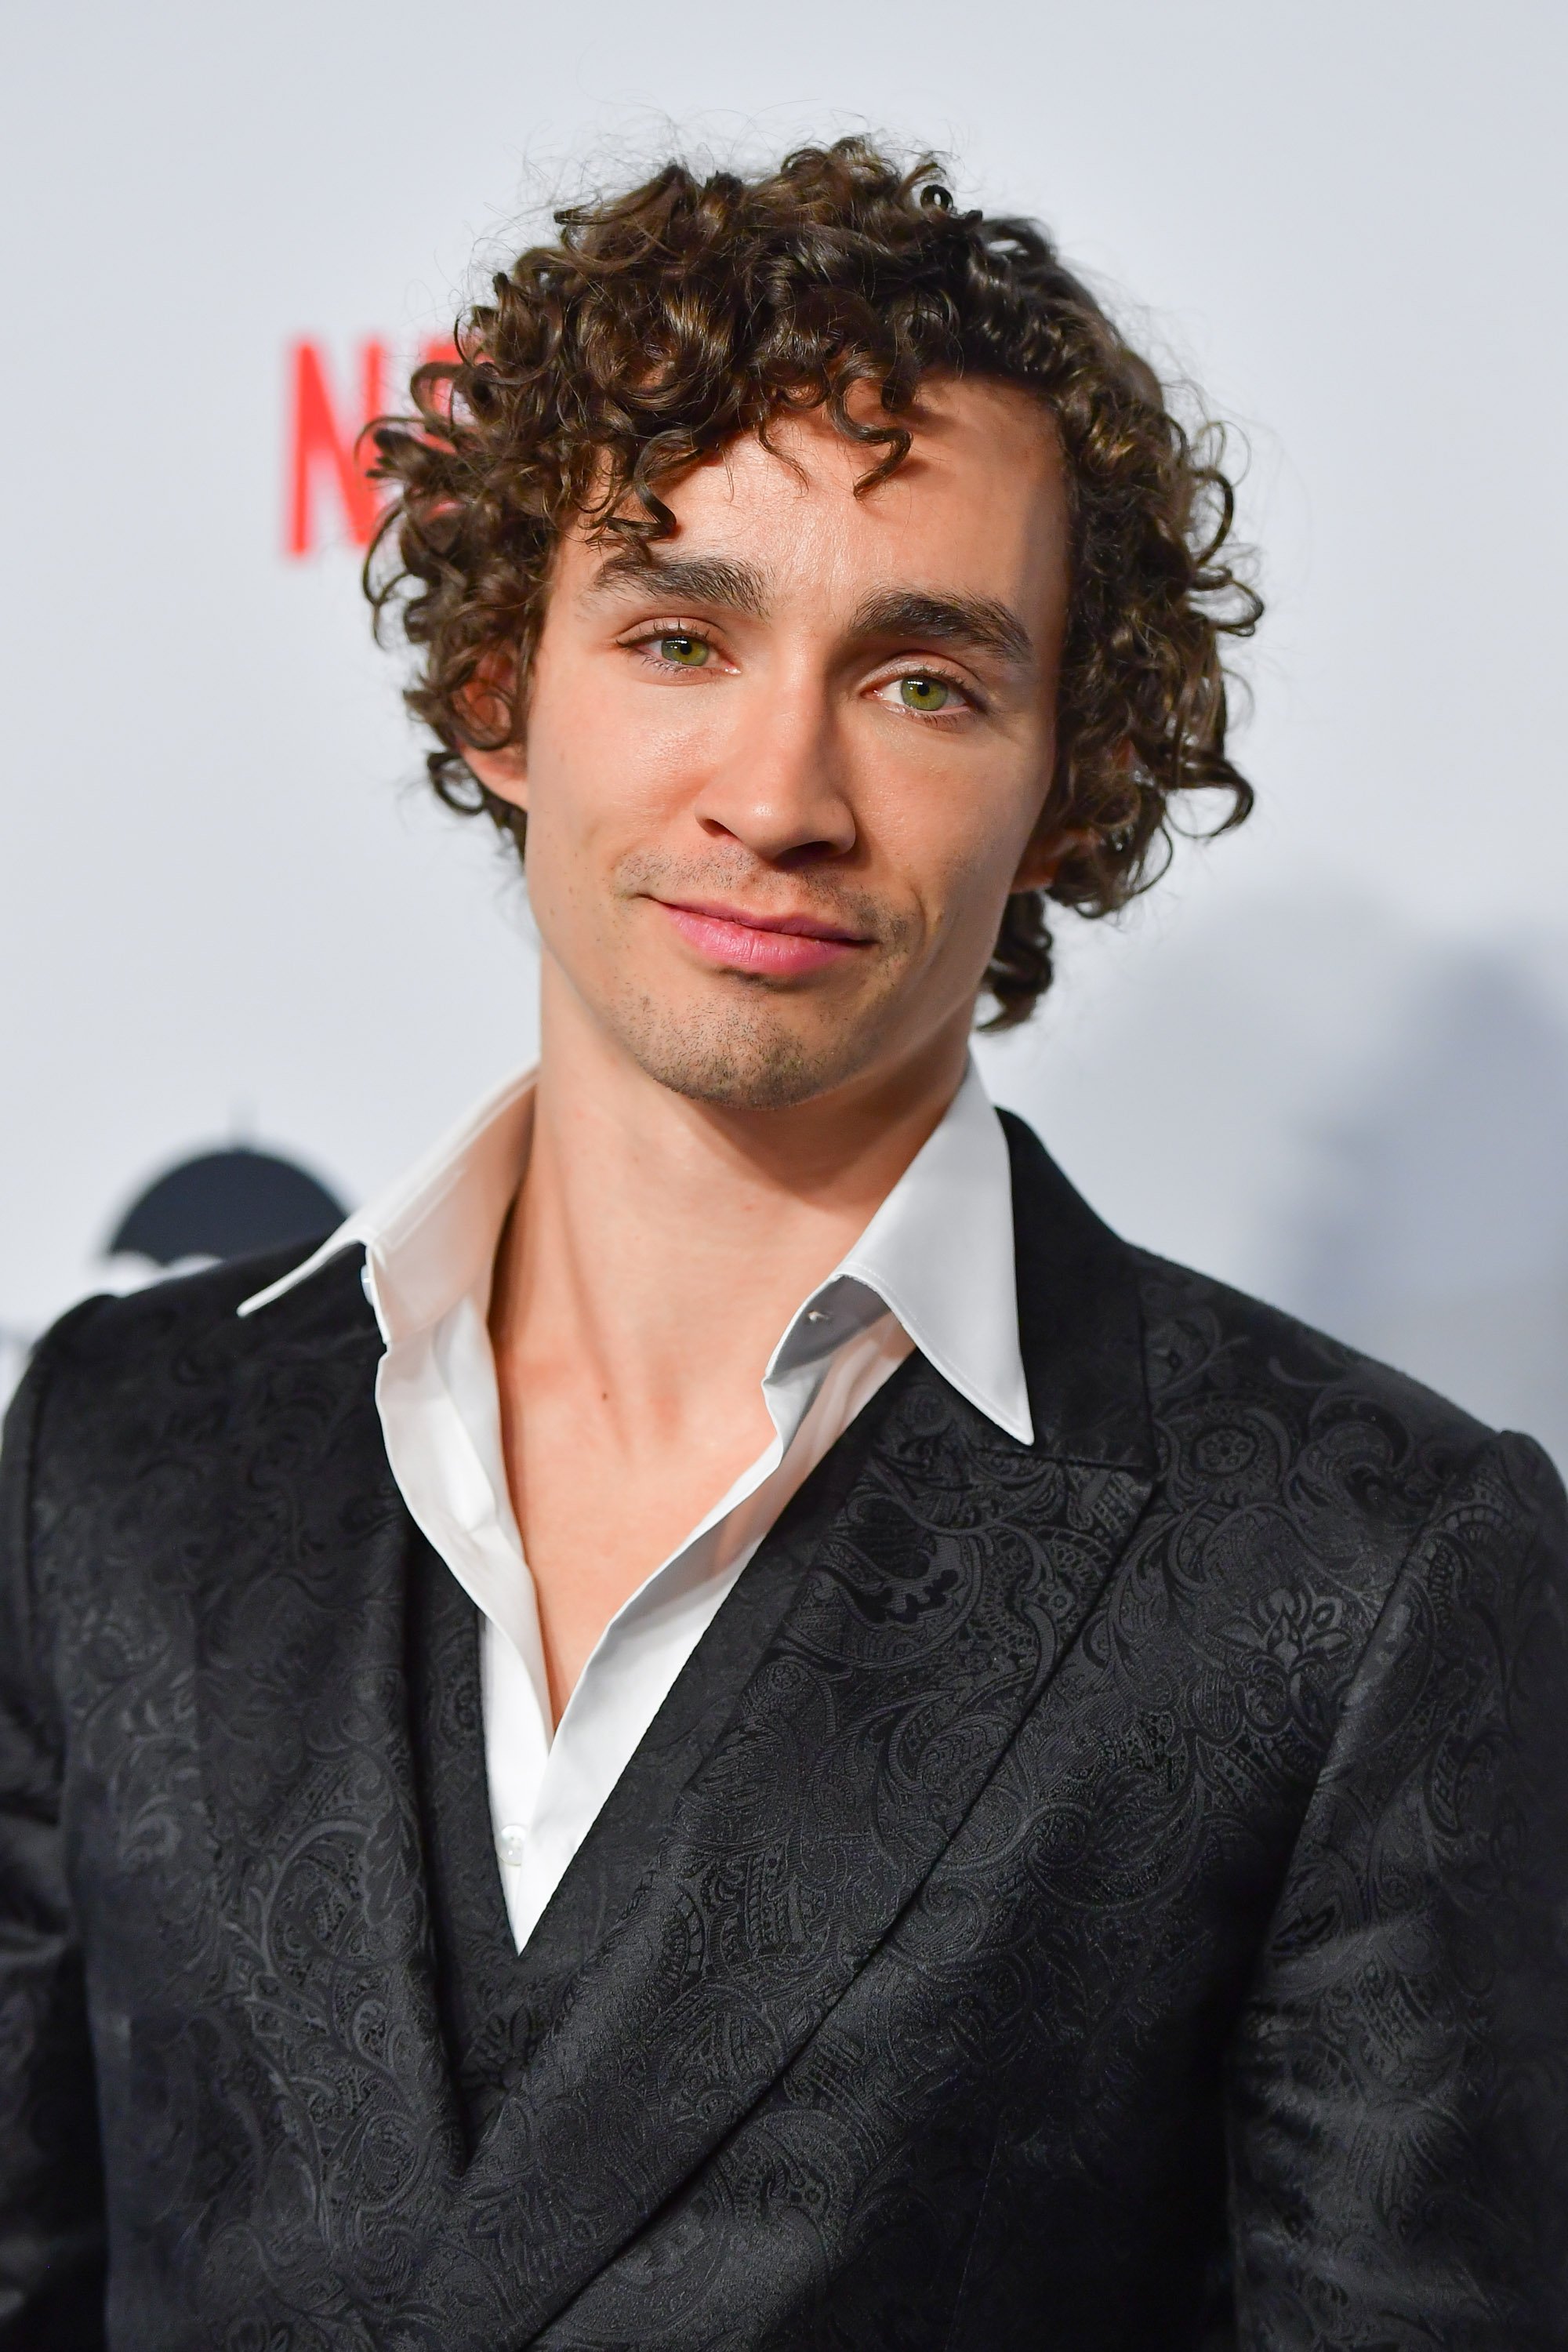 Robert Sheehan attends the premiere of Netflix's 'The Umbrella Academy' / Getty Images